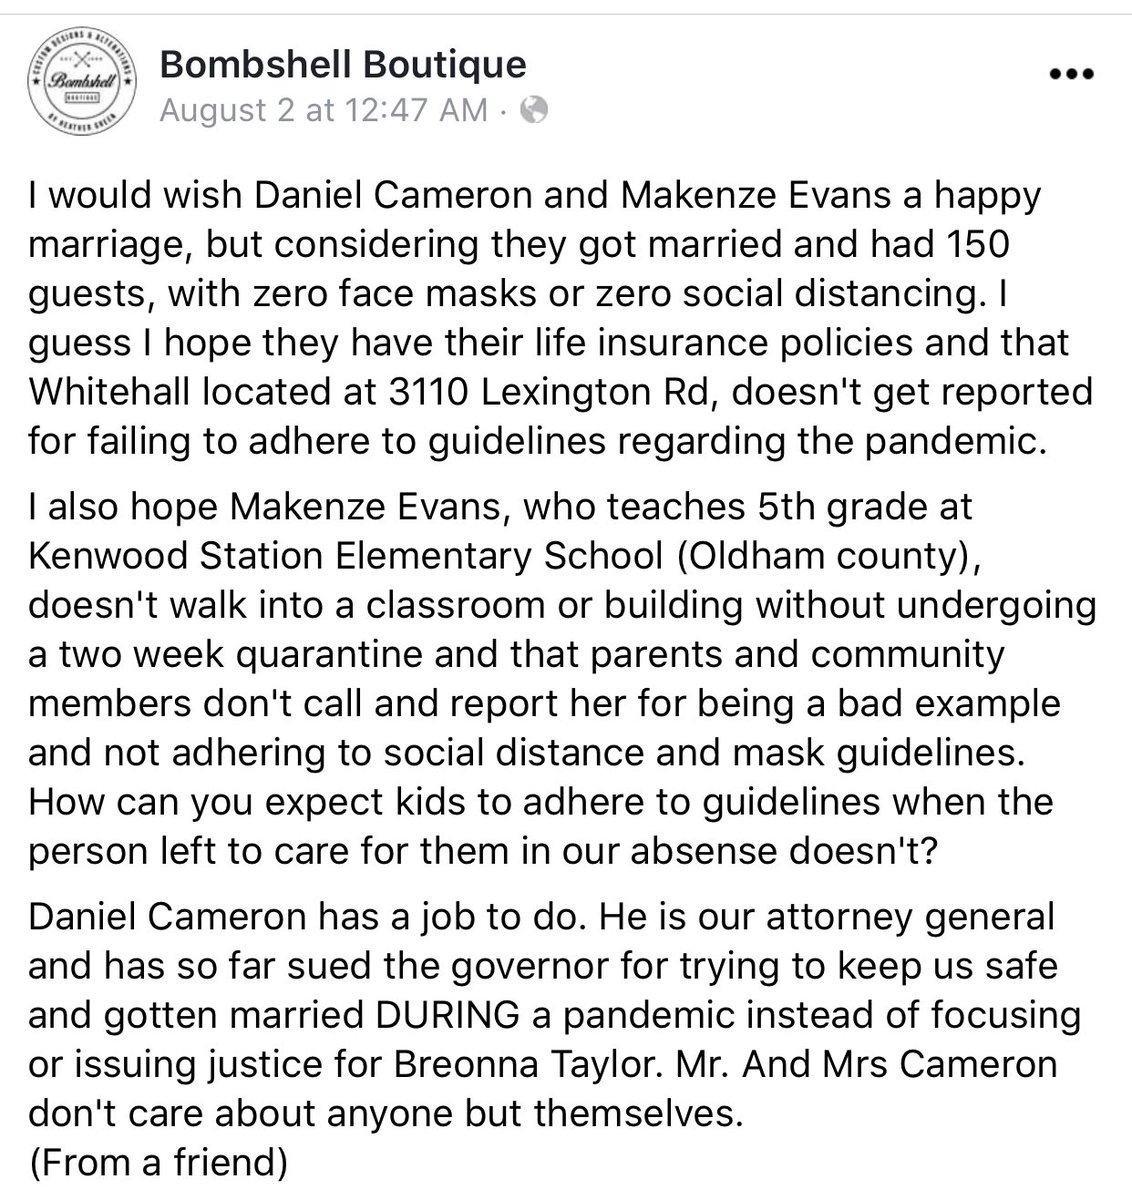 An business in Lexington, KY, Bombshell Boutique, blasted Daniel Cameron for getting married with 150 guests in attendance and “zero masks and zero social distancing.”